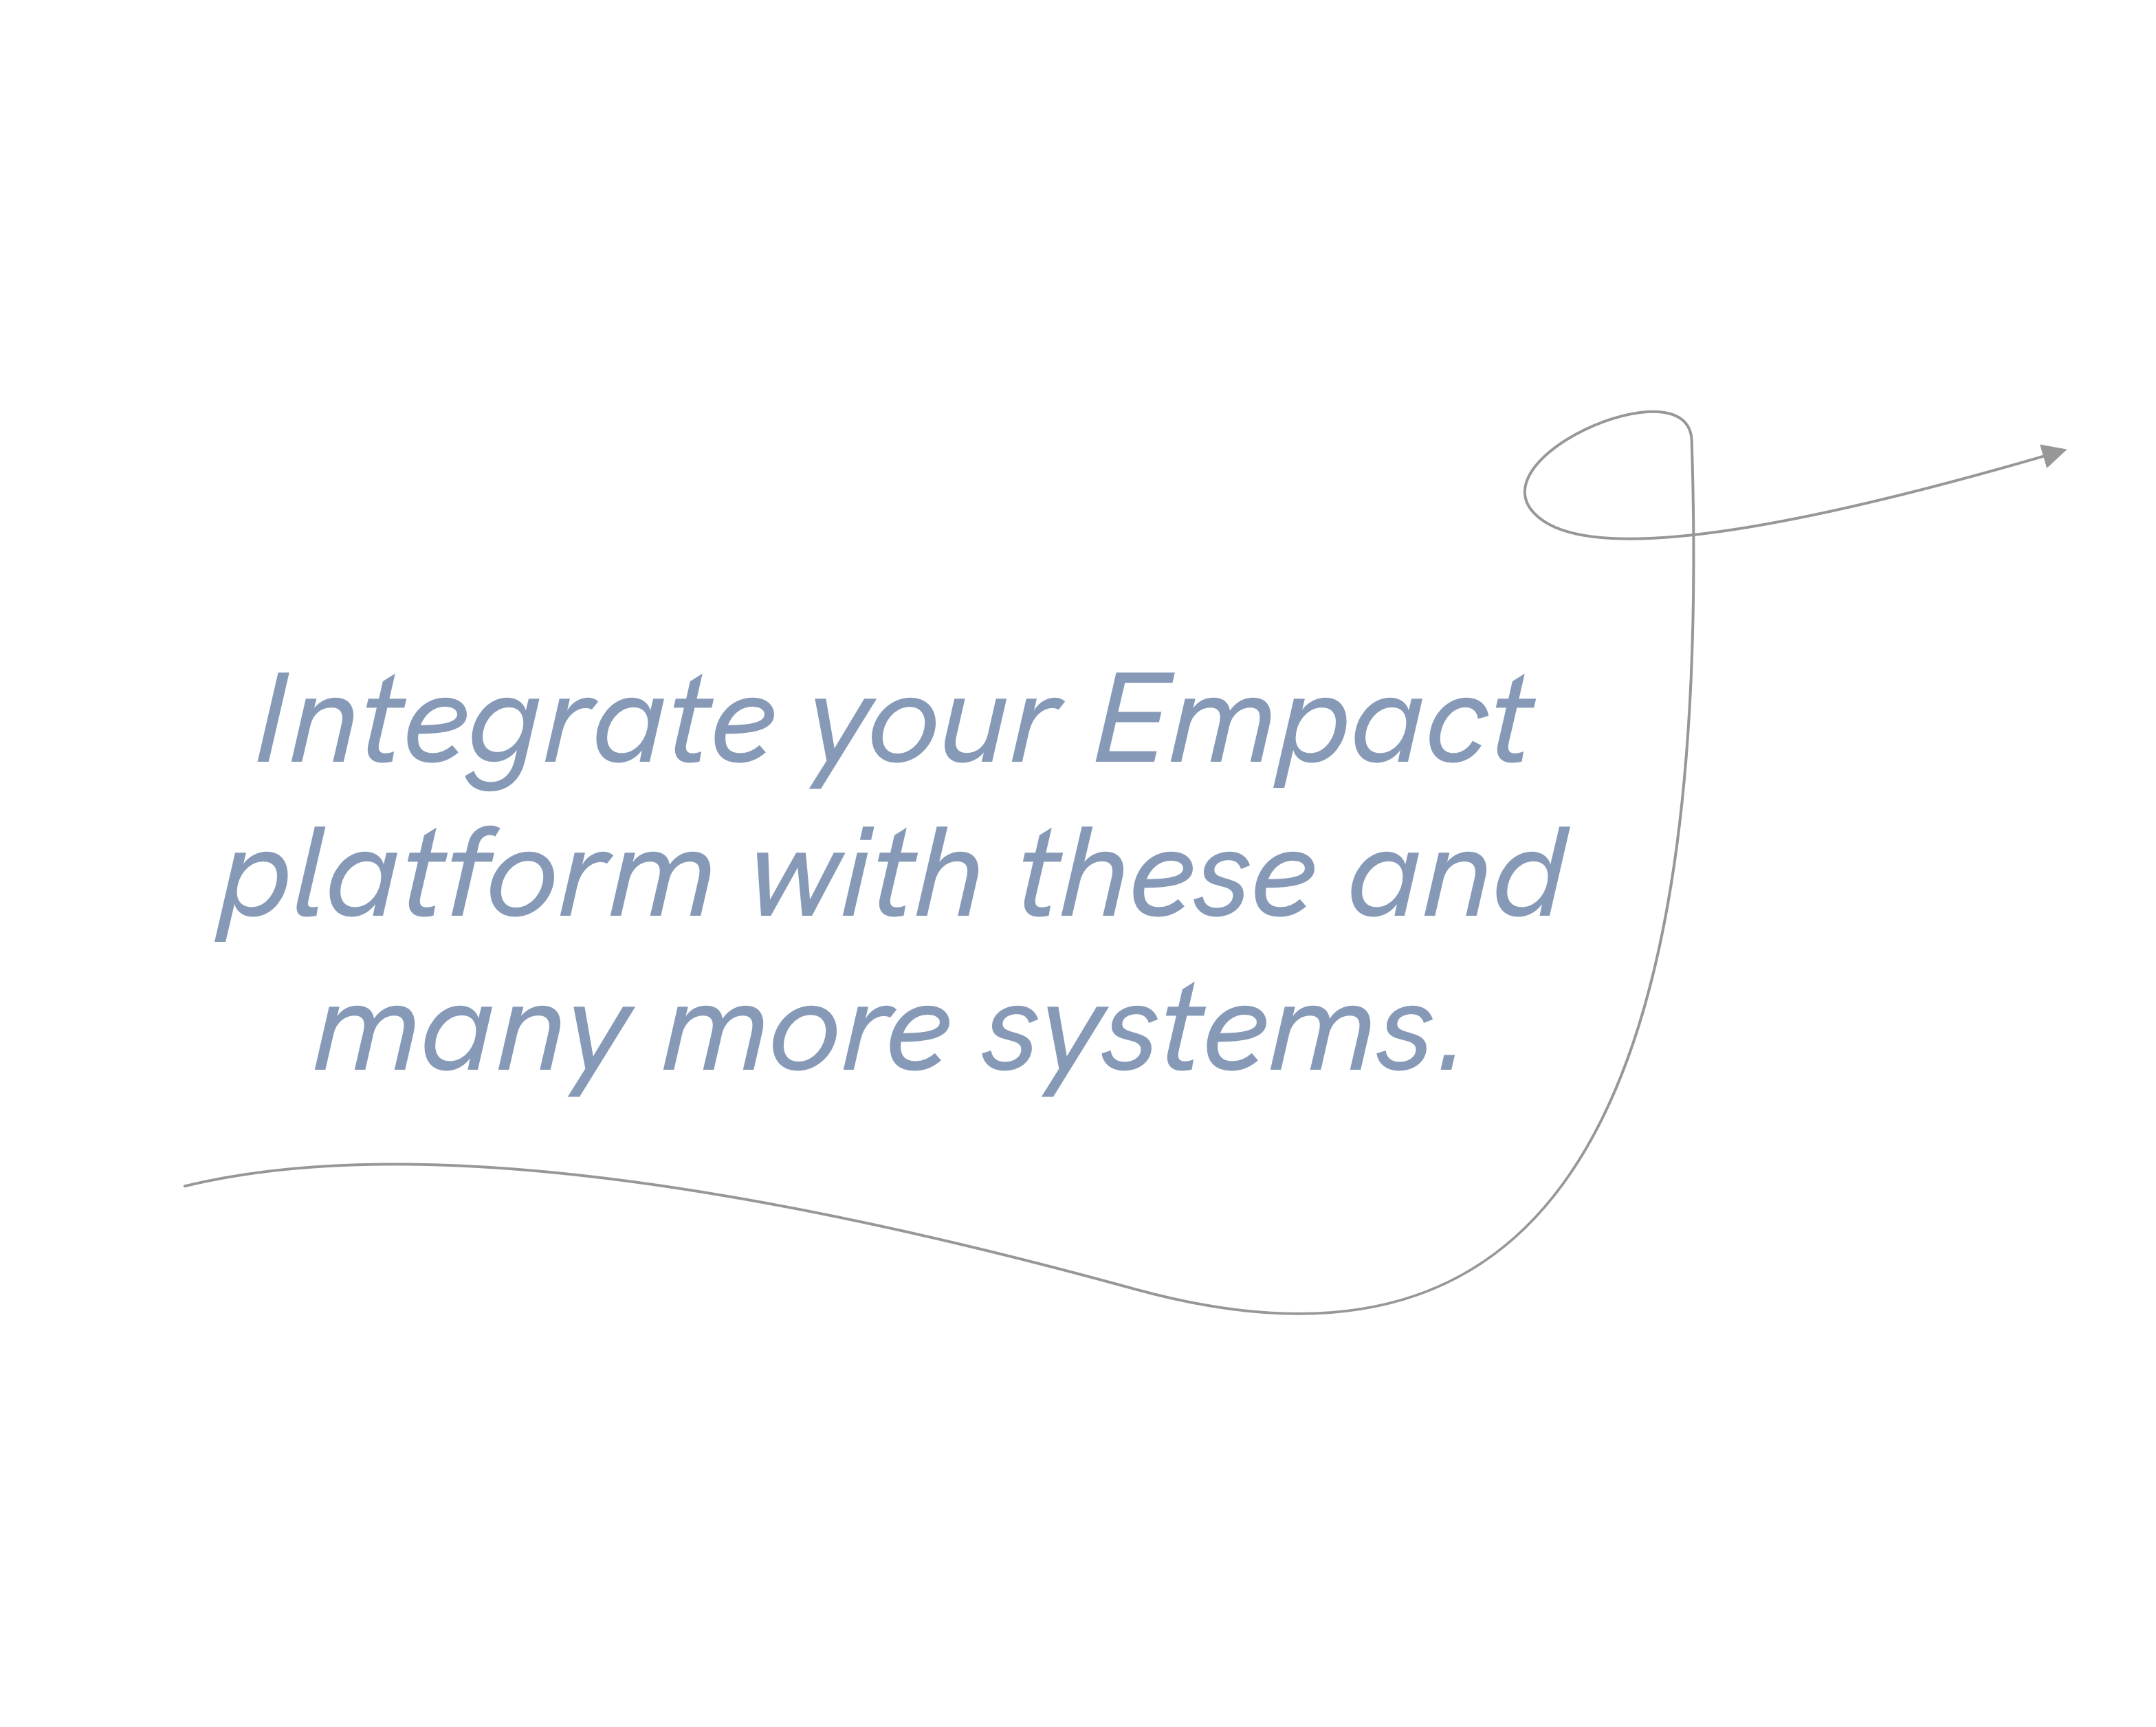 The one-stop app to integrate different IT systems